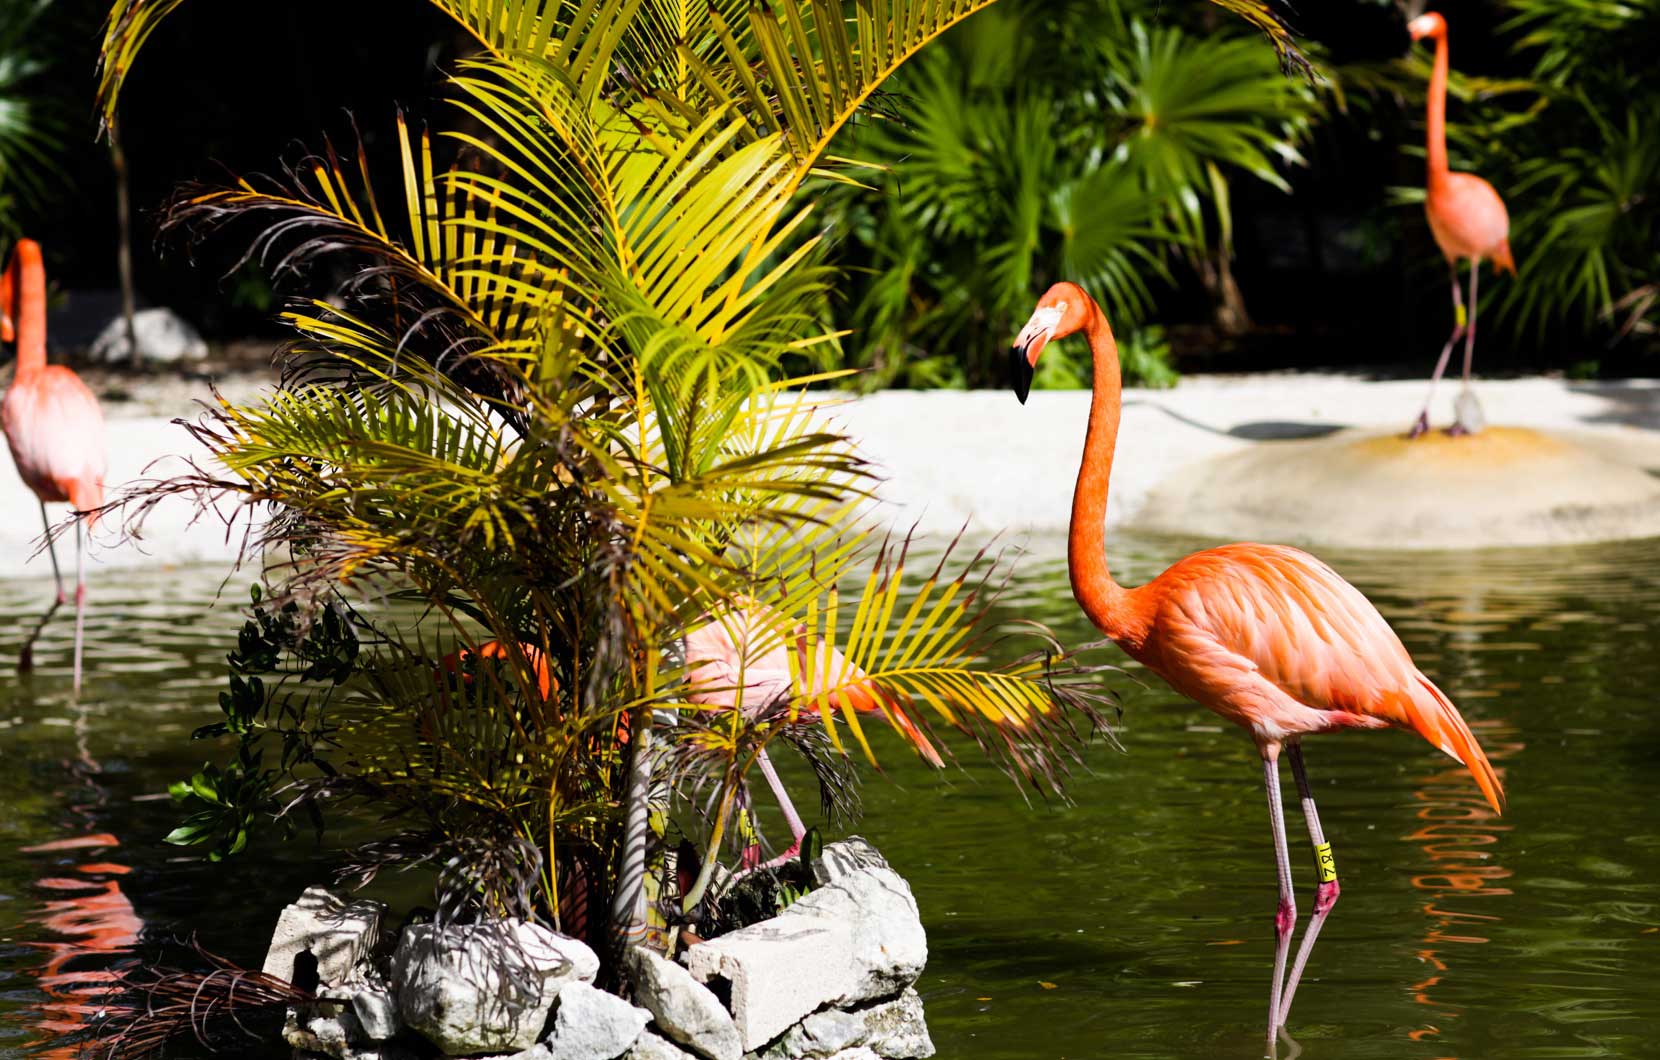 Be sure to spend some time at our flamingo sanctuary.